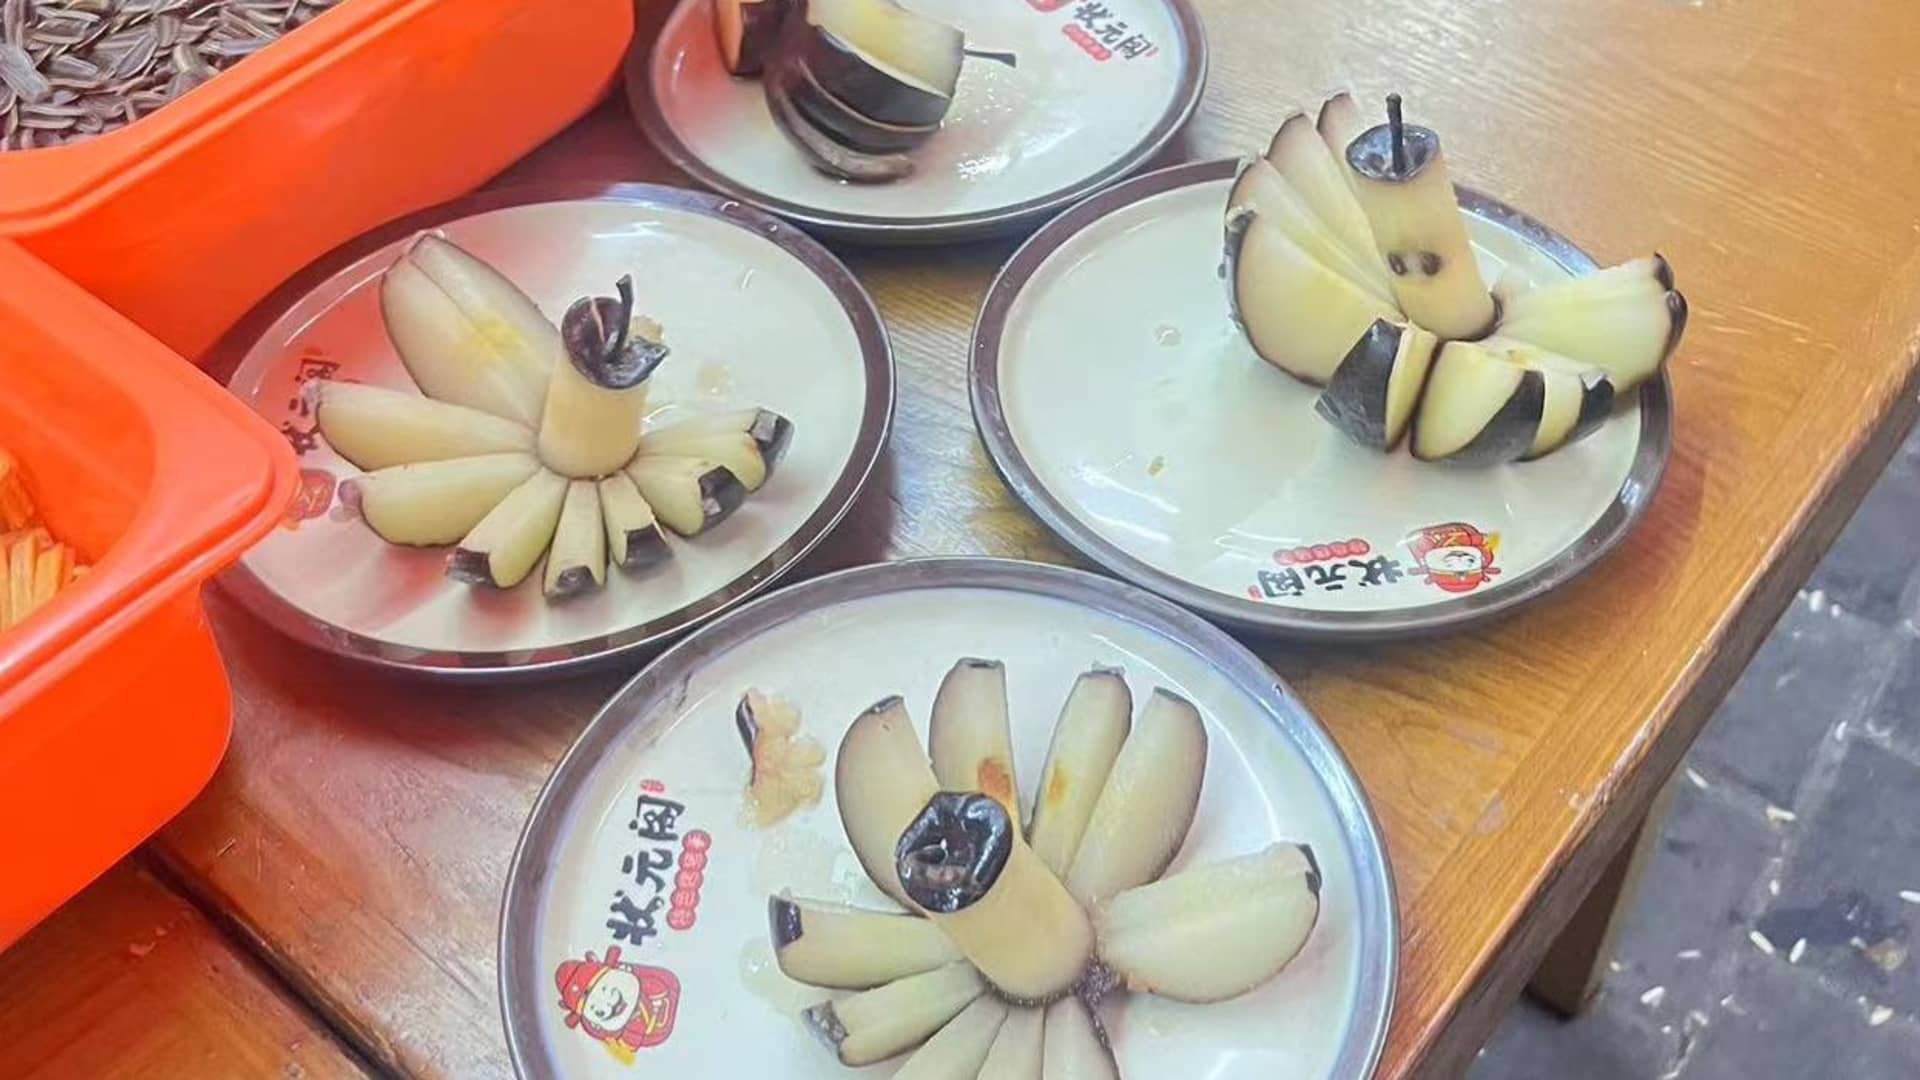 Restaurants served free frozen pears cut the way southern Chinese prefer to eat them.